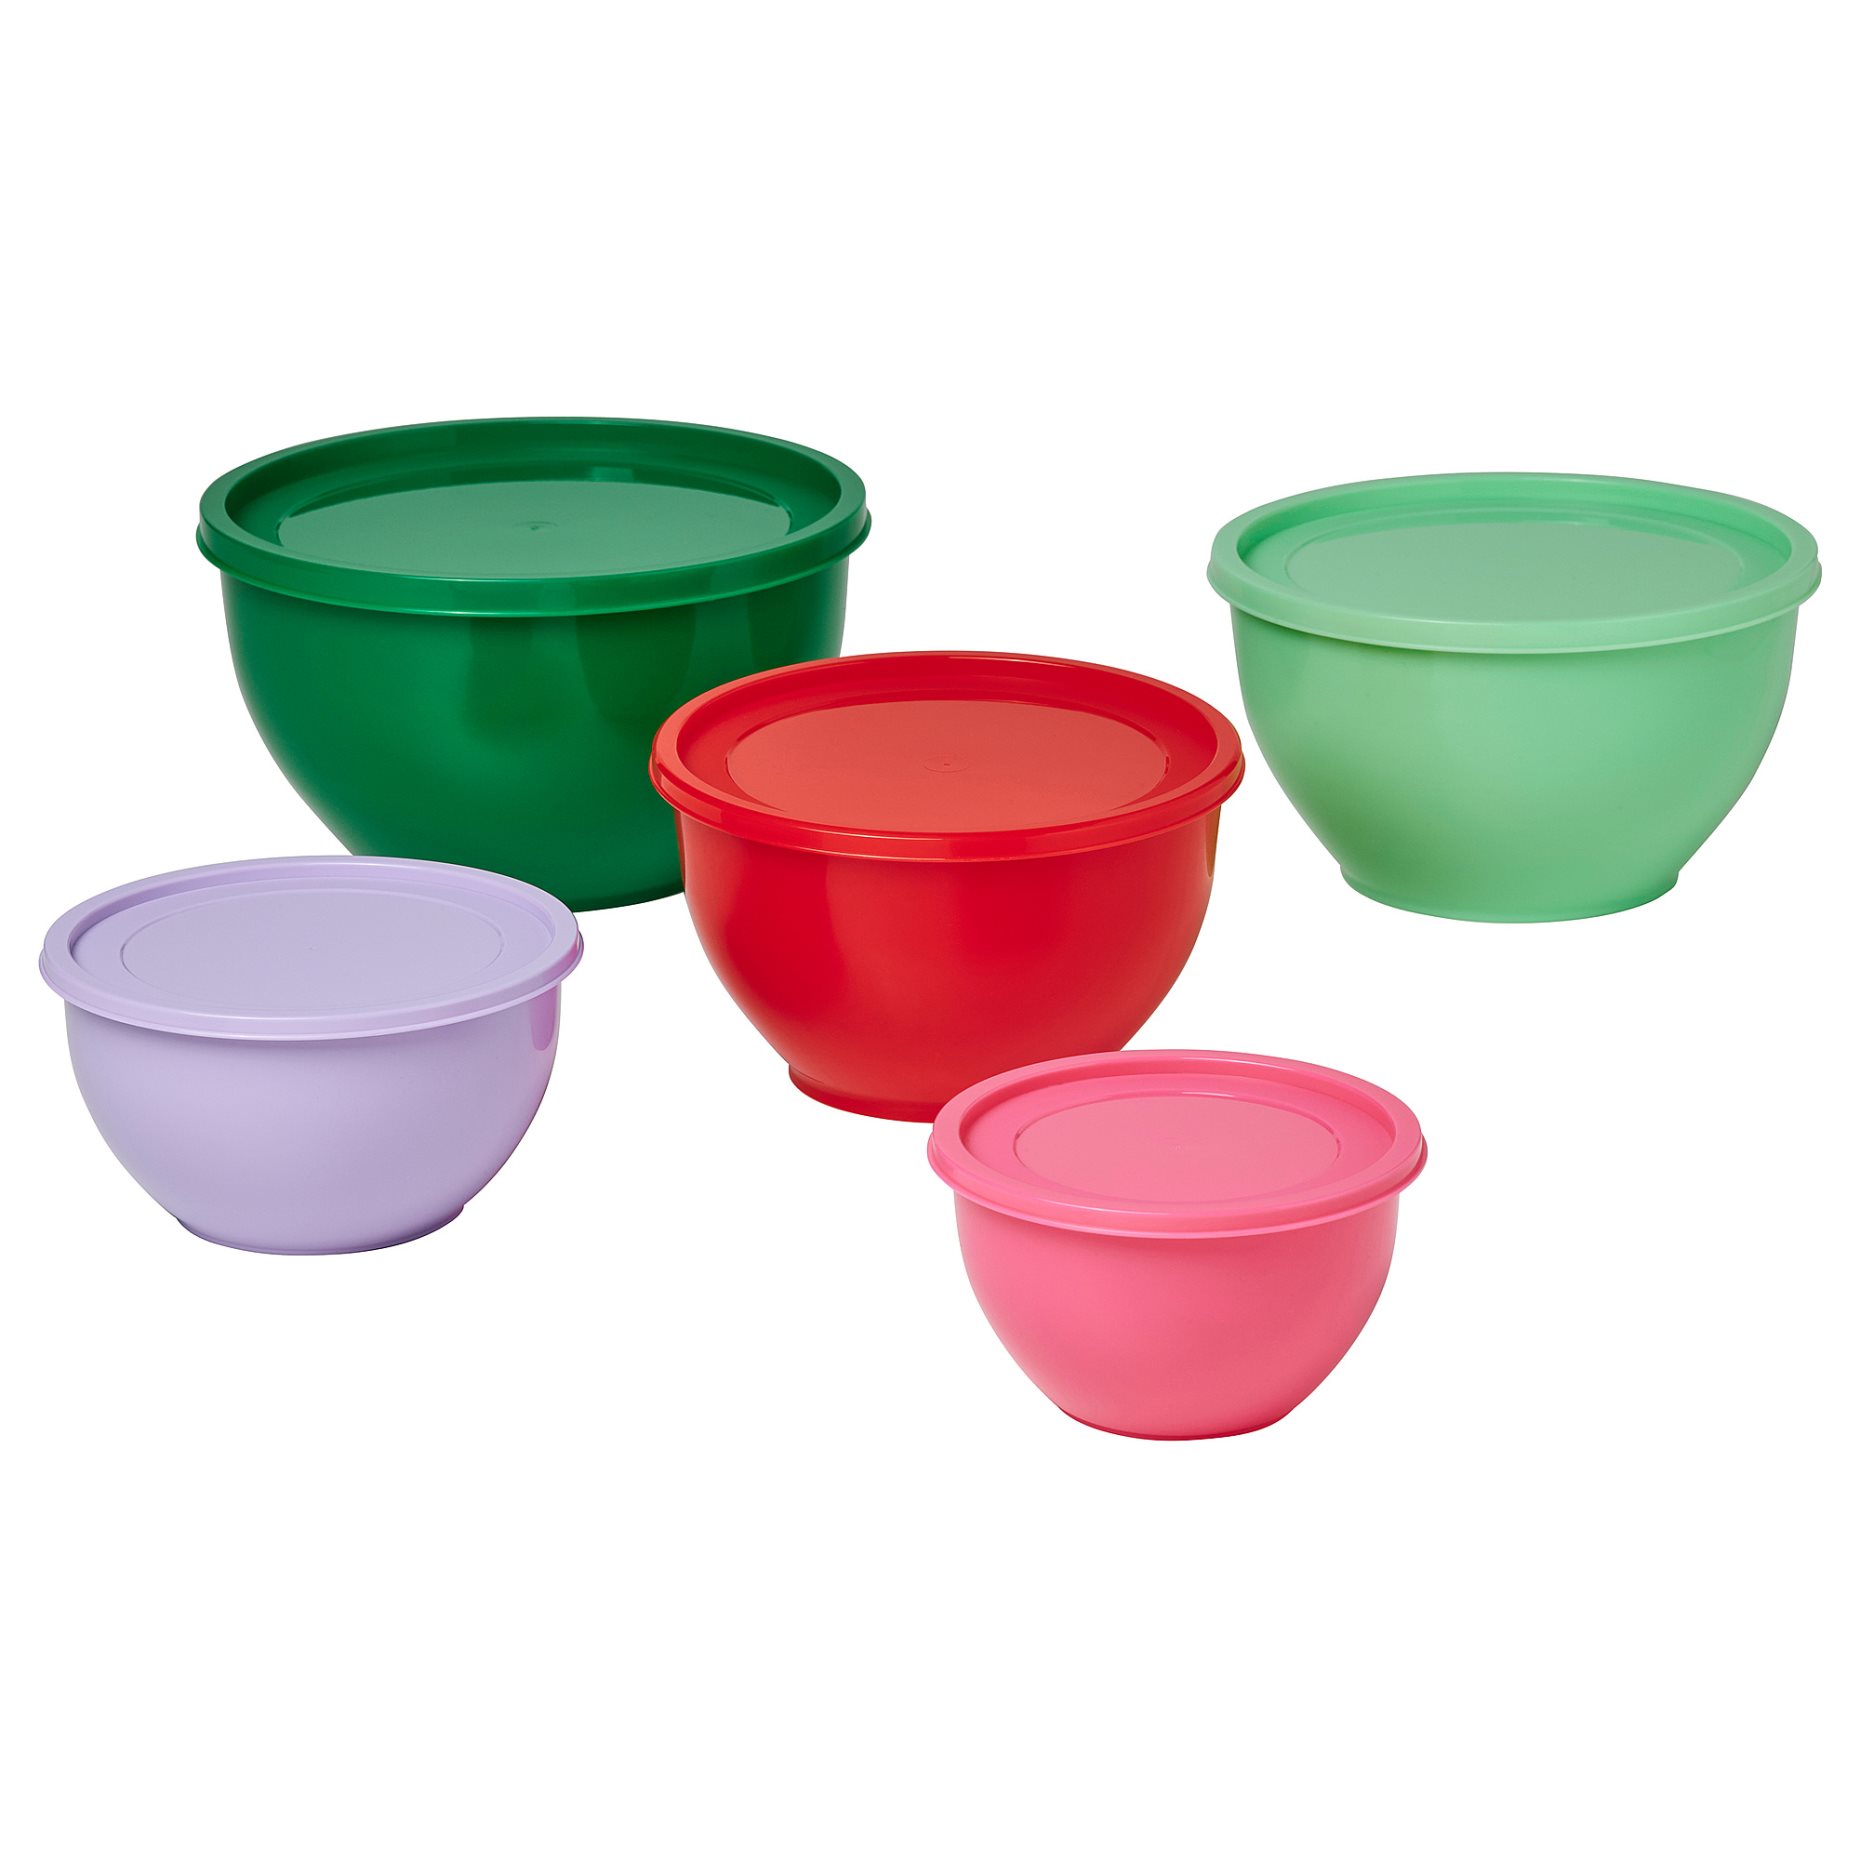 TABBERAS, bowl with lid, set of 5, 205.519.77